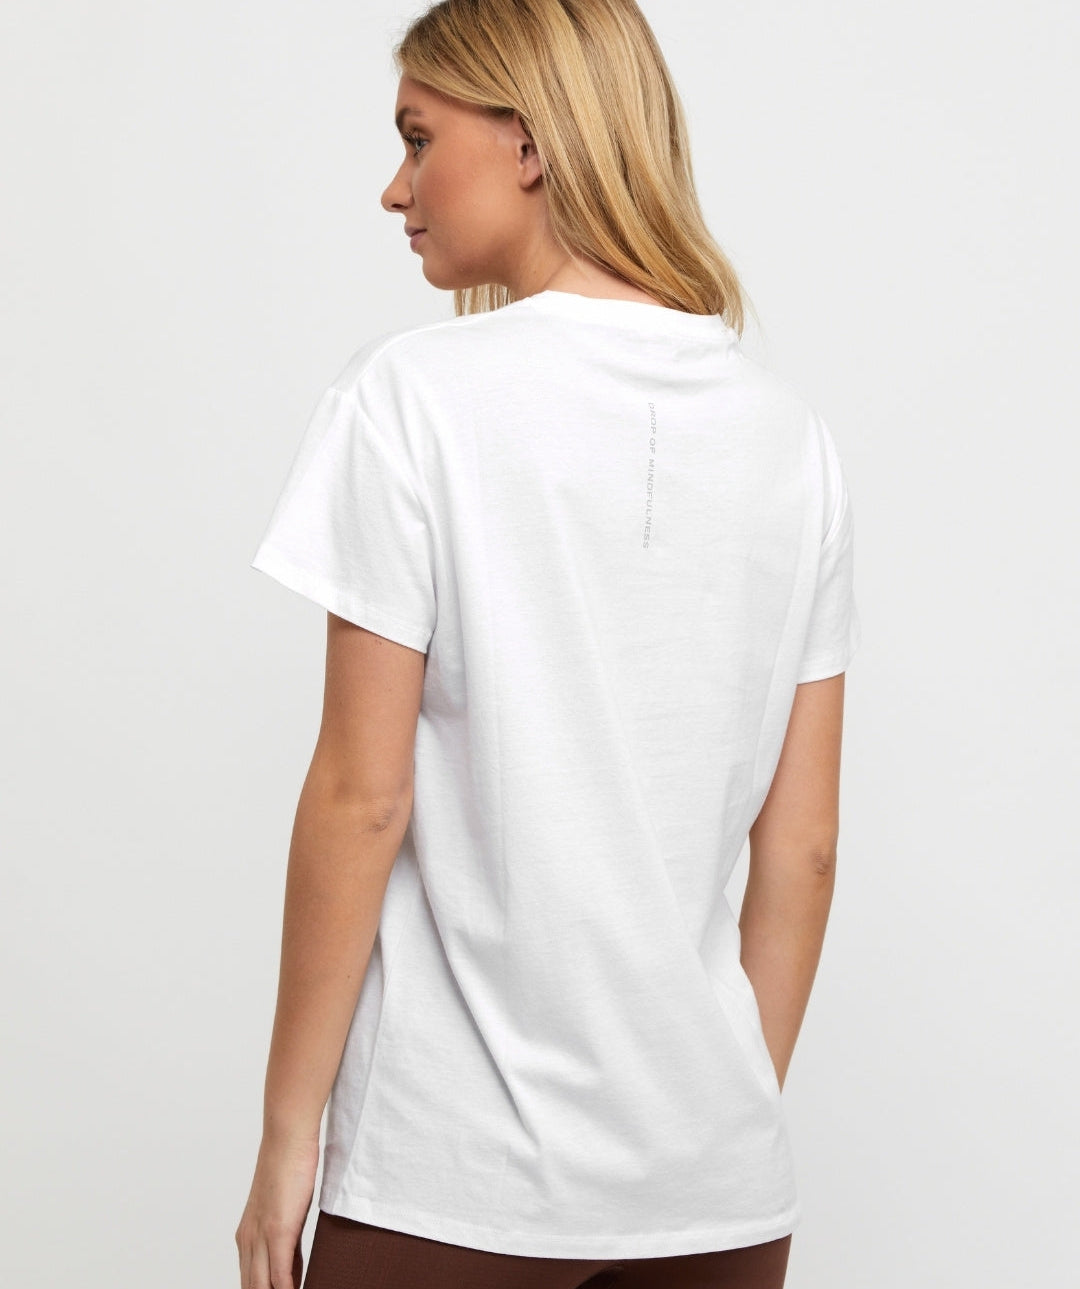 Drop of Mindfulness - Louise T-shirt (White)